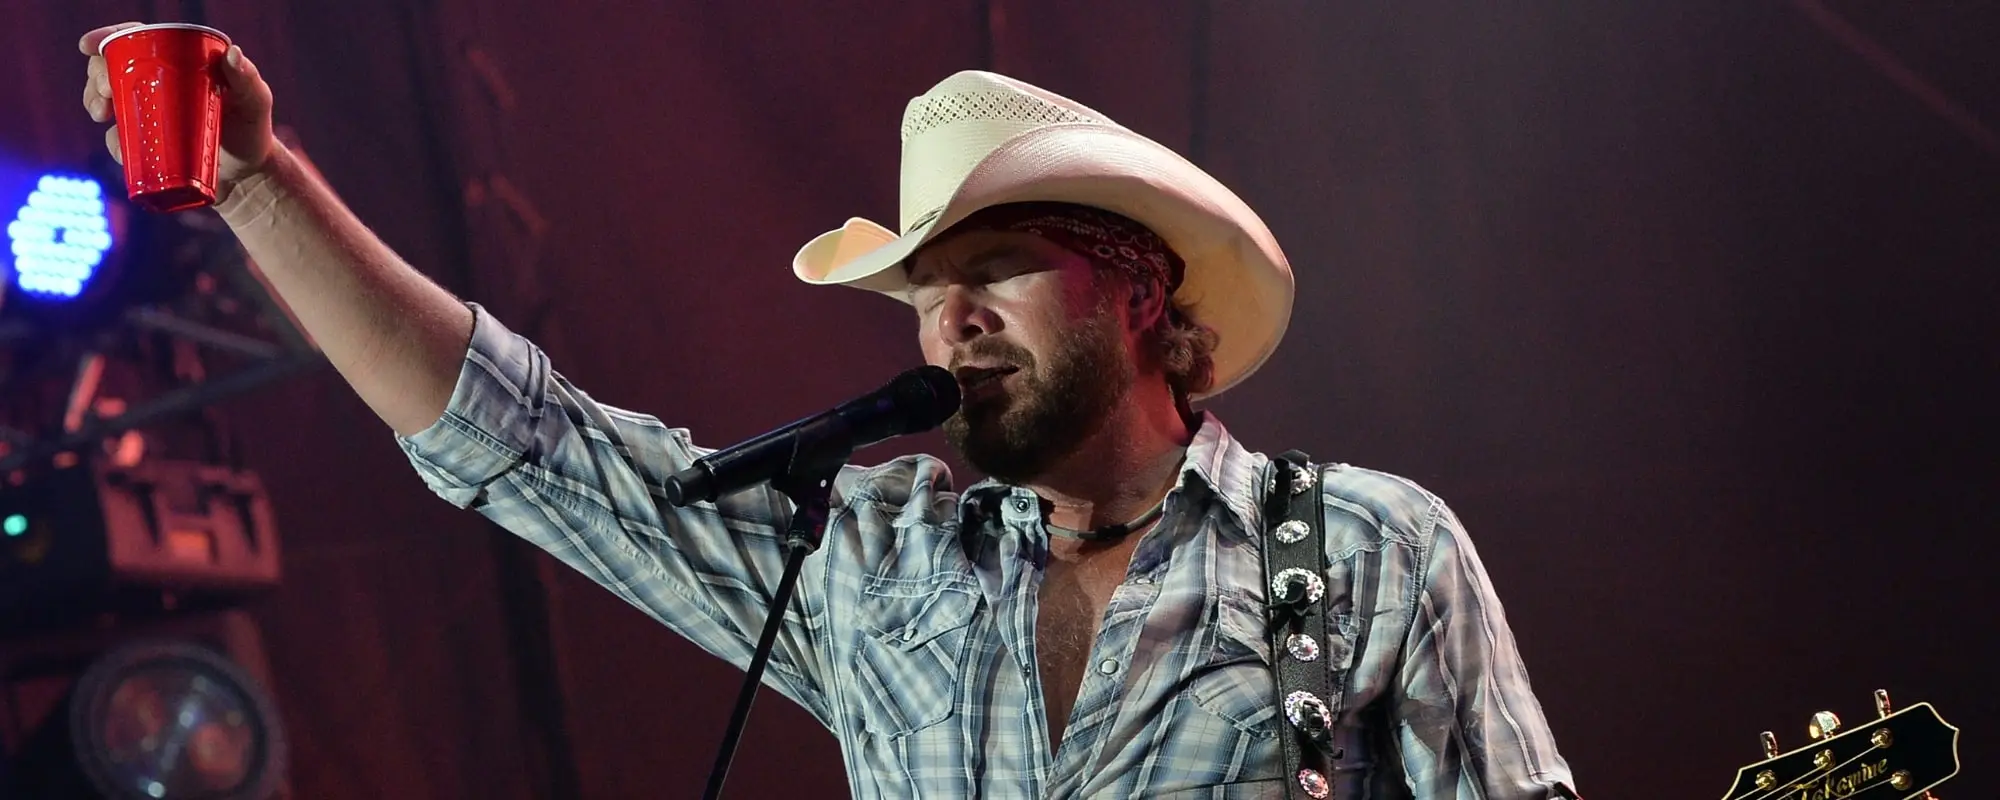 5 Hall of Fame Worthy Songs from Toby Keith